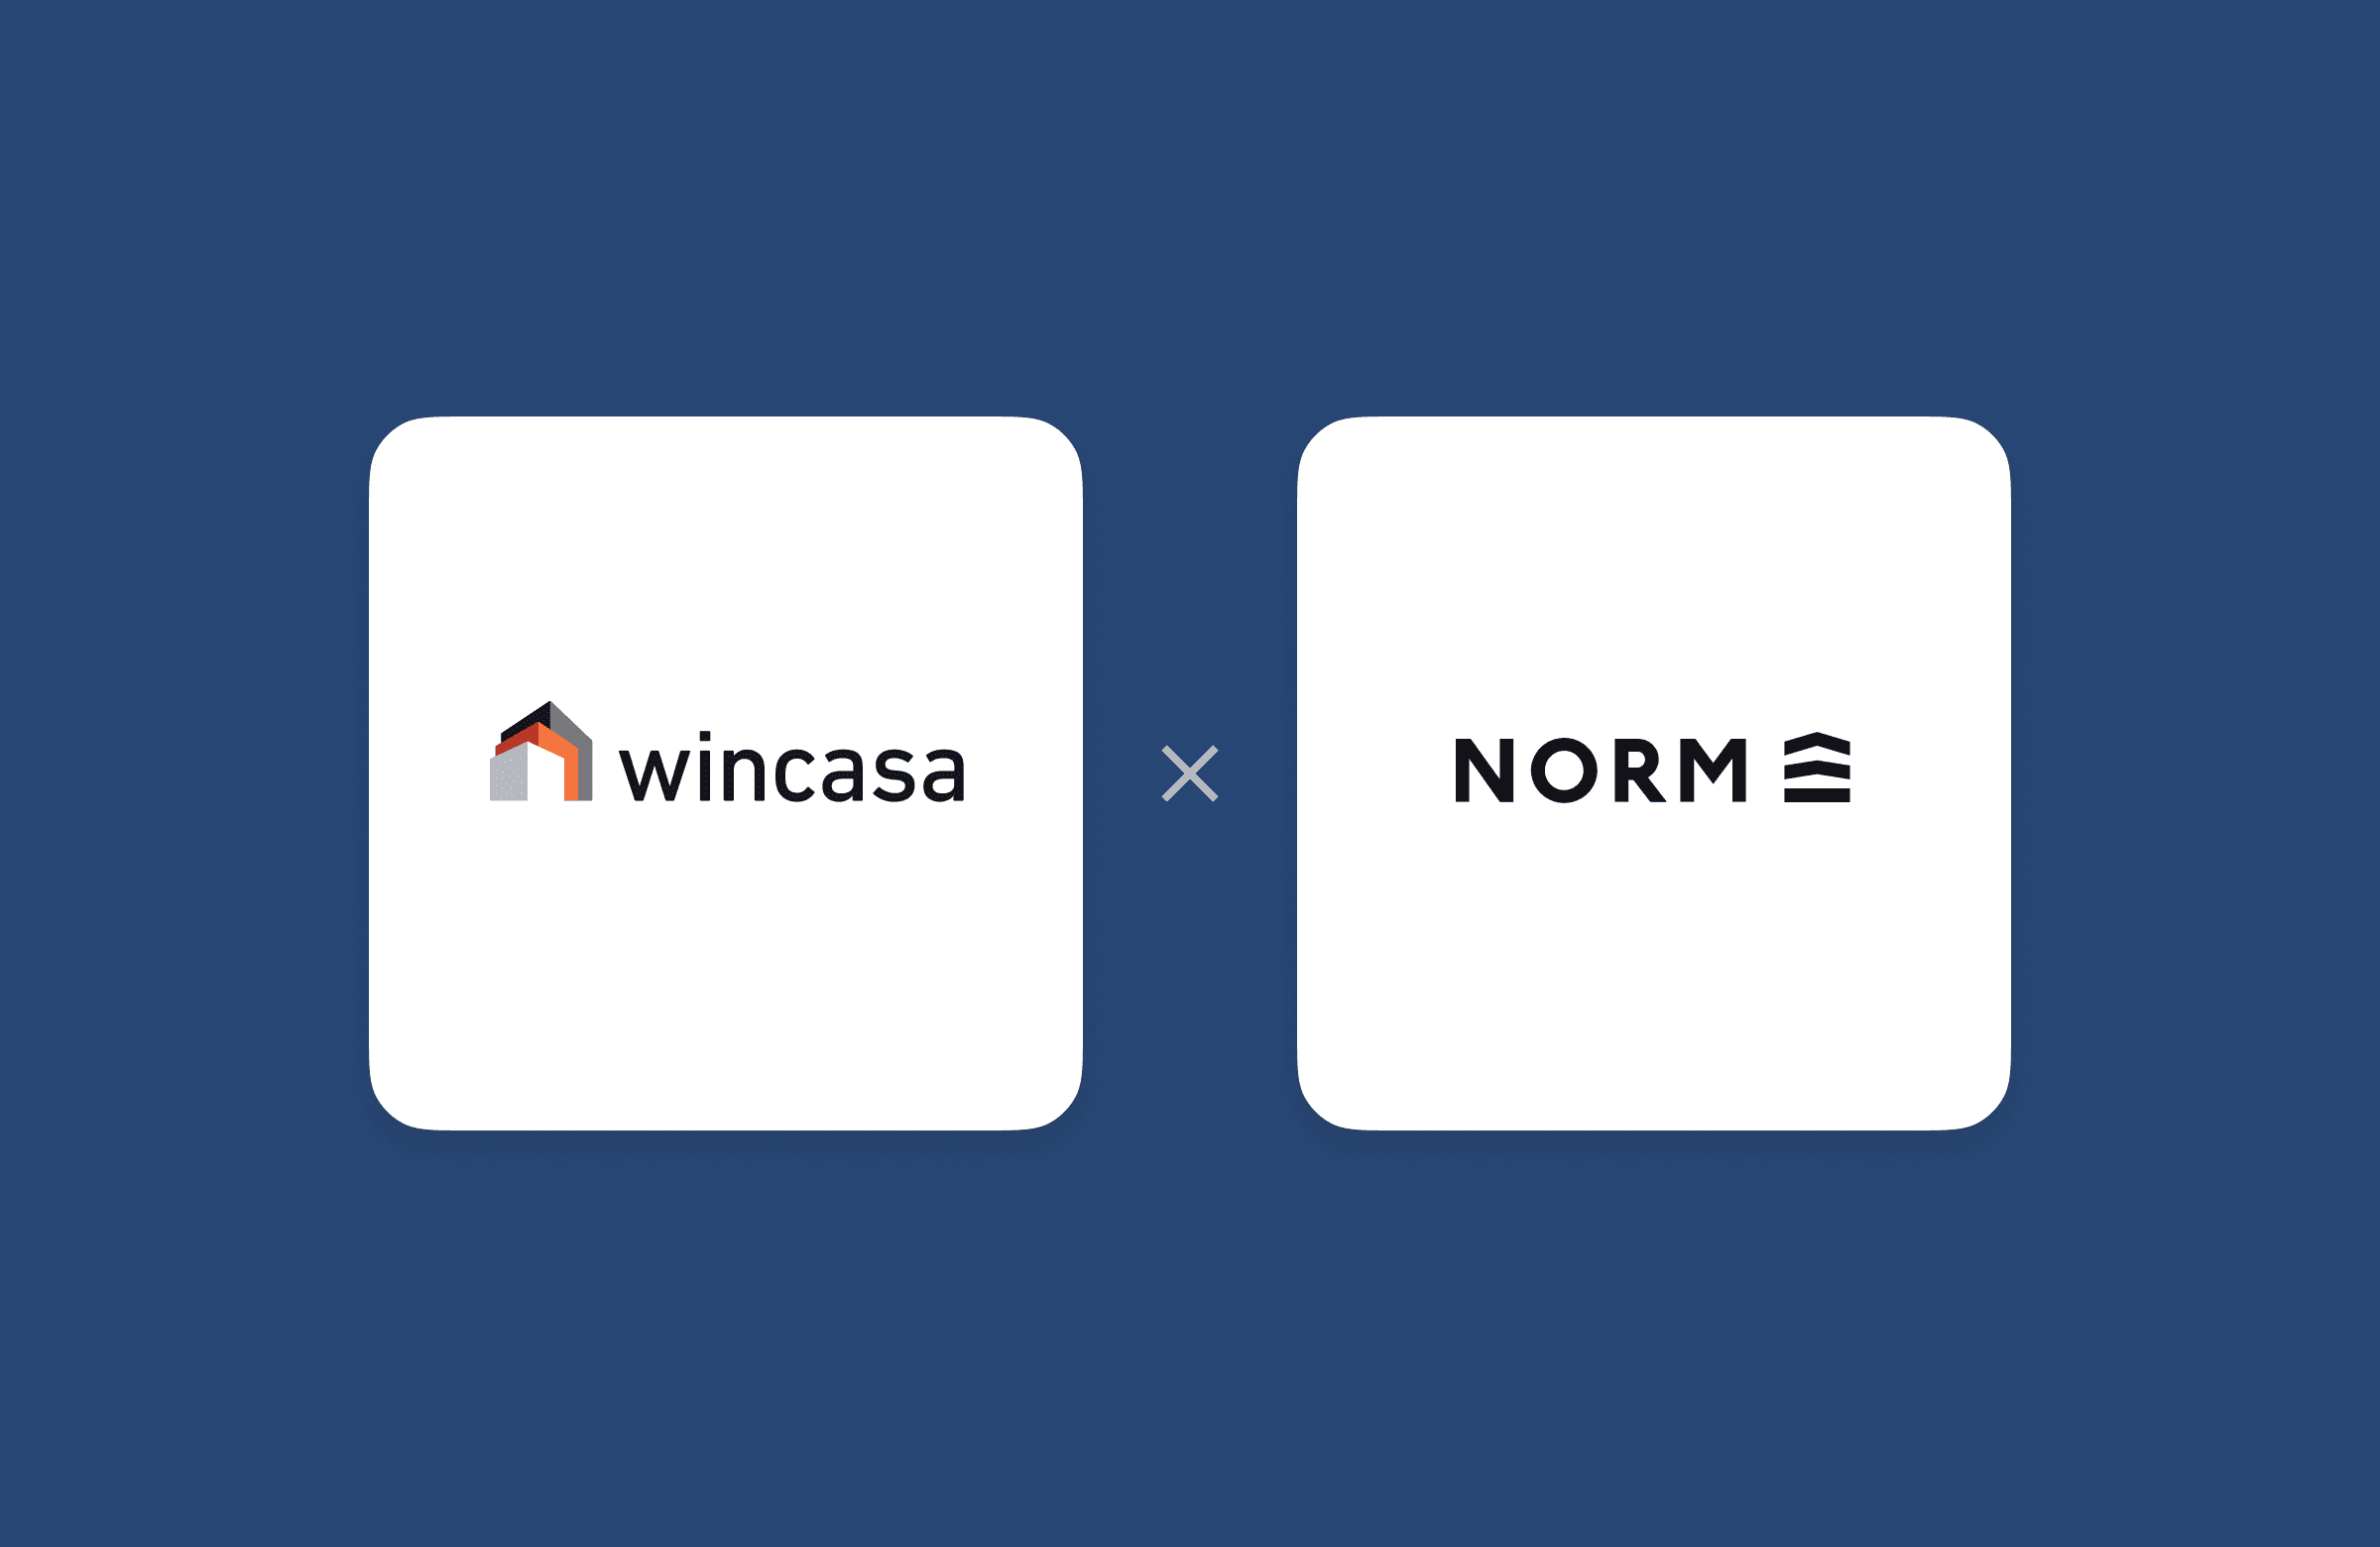 Analysis and certification of the energy efficiency of complex real estate portfolios through a partnership between Wincasa and NORM